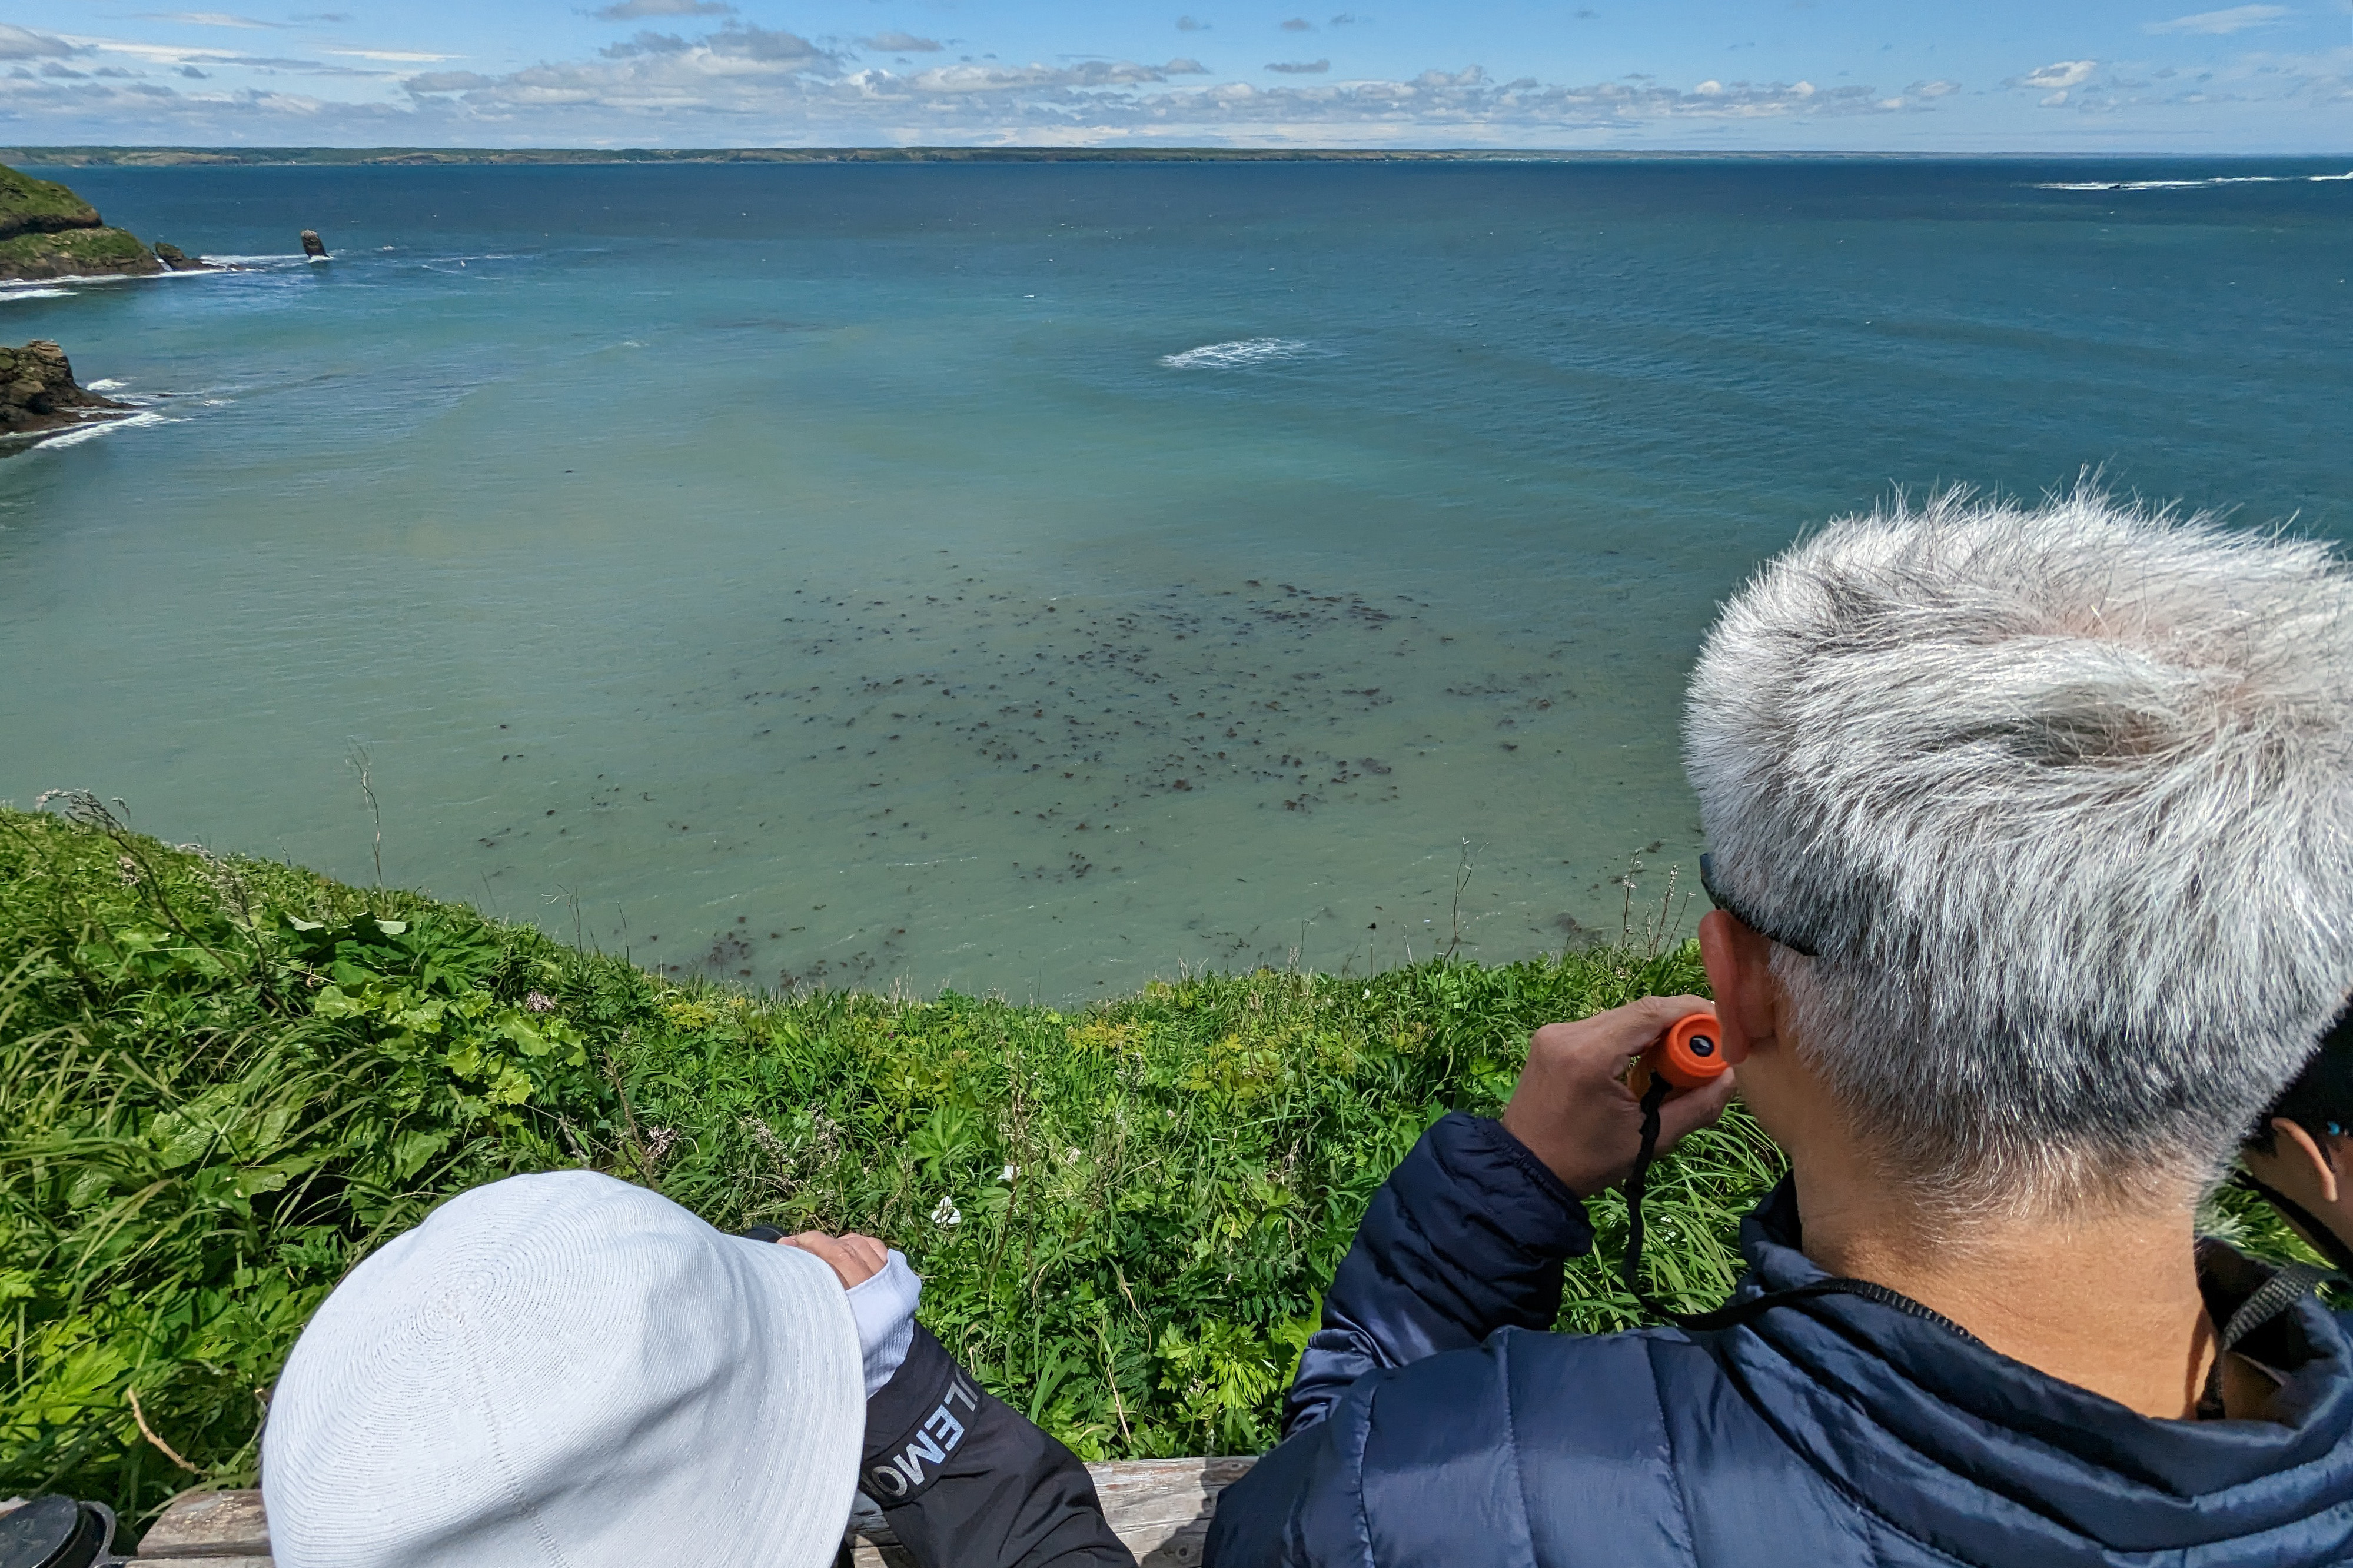 Two wildlife watchers search for Sea Otters along the pacific coast of Hokkaido